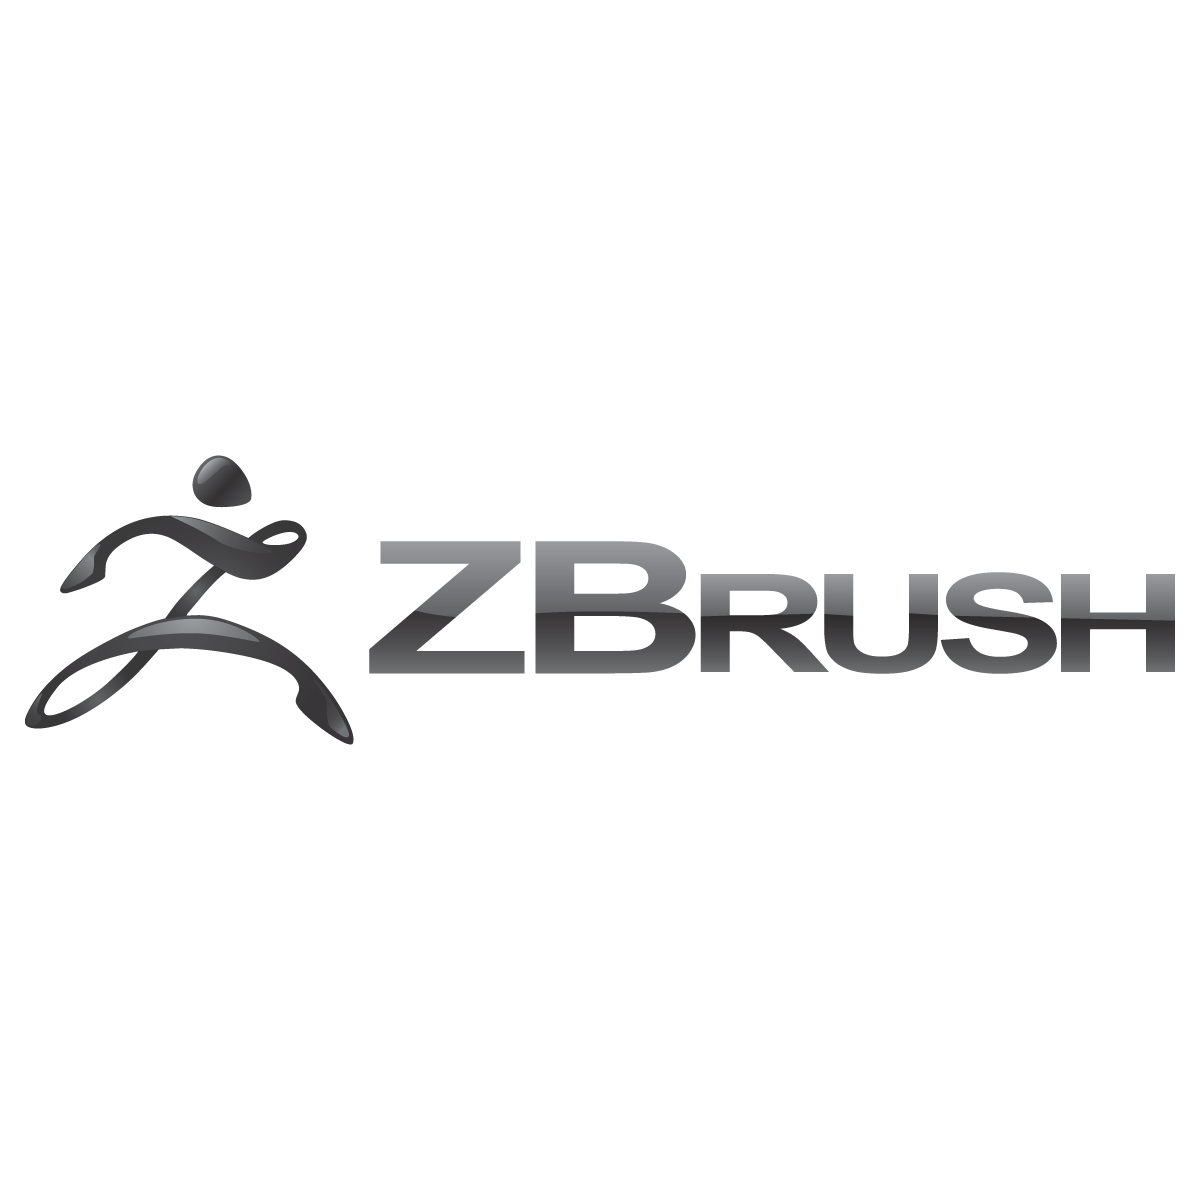 ZBrush Logo - ZBrush Logo Vector | Free Vector Silhouette Graphics AI EPS SVG PNG ...